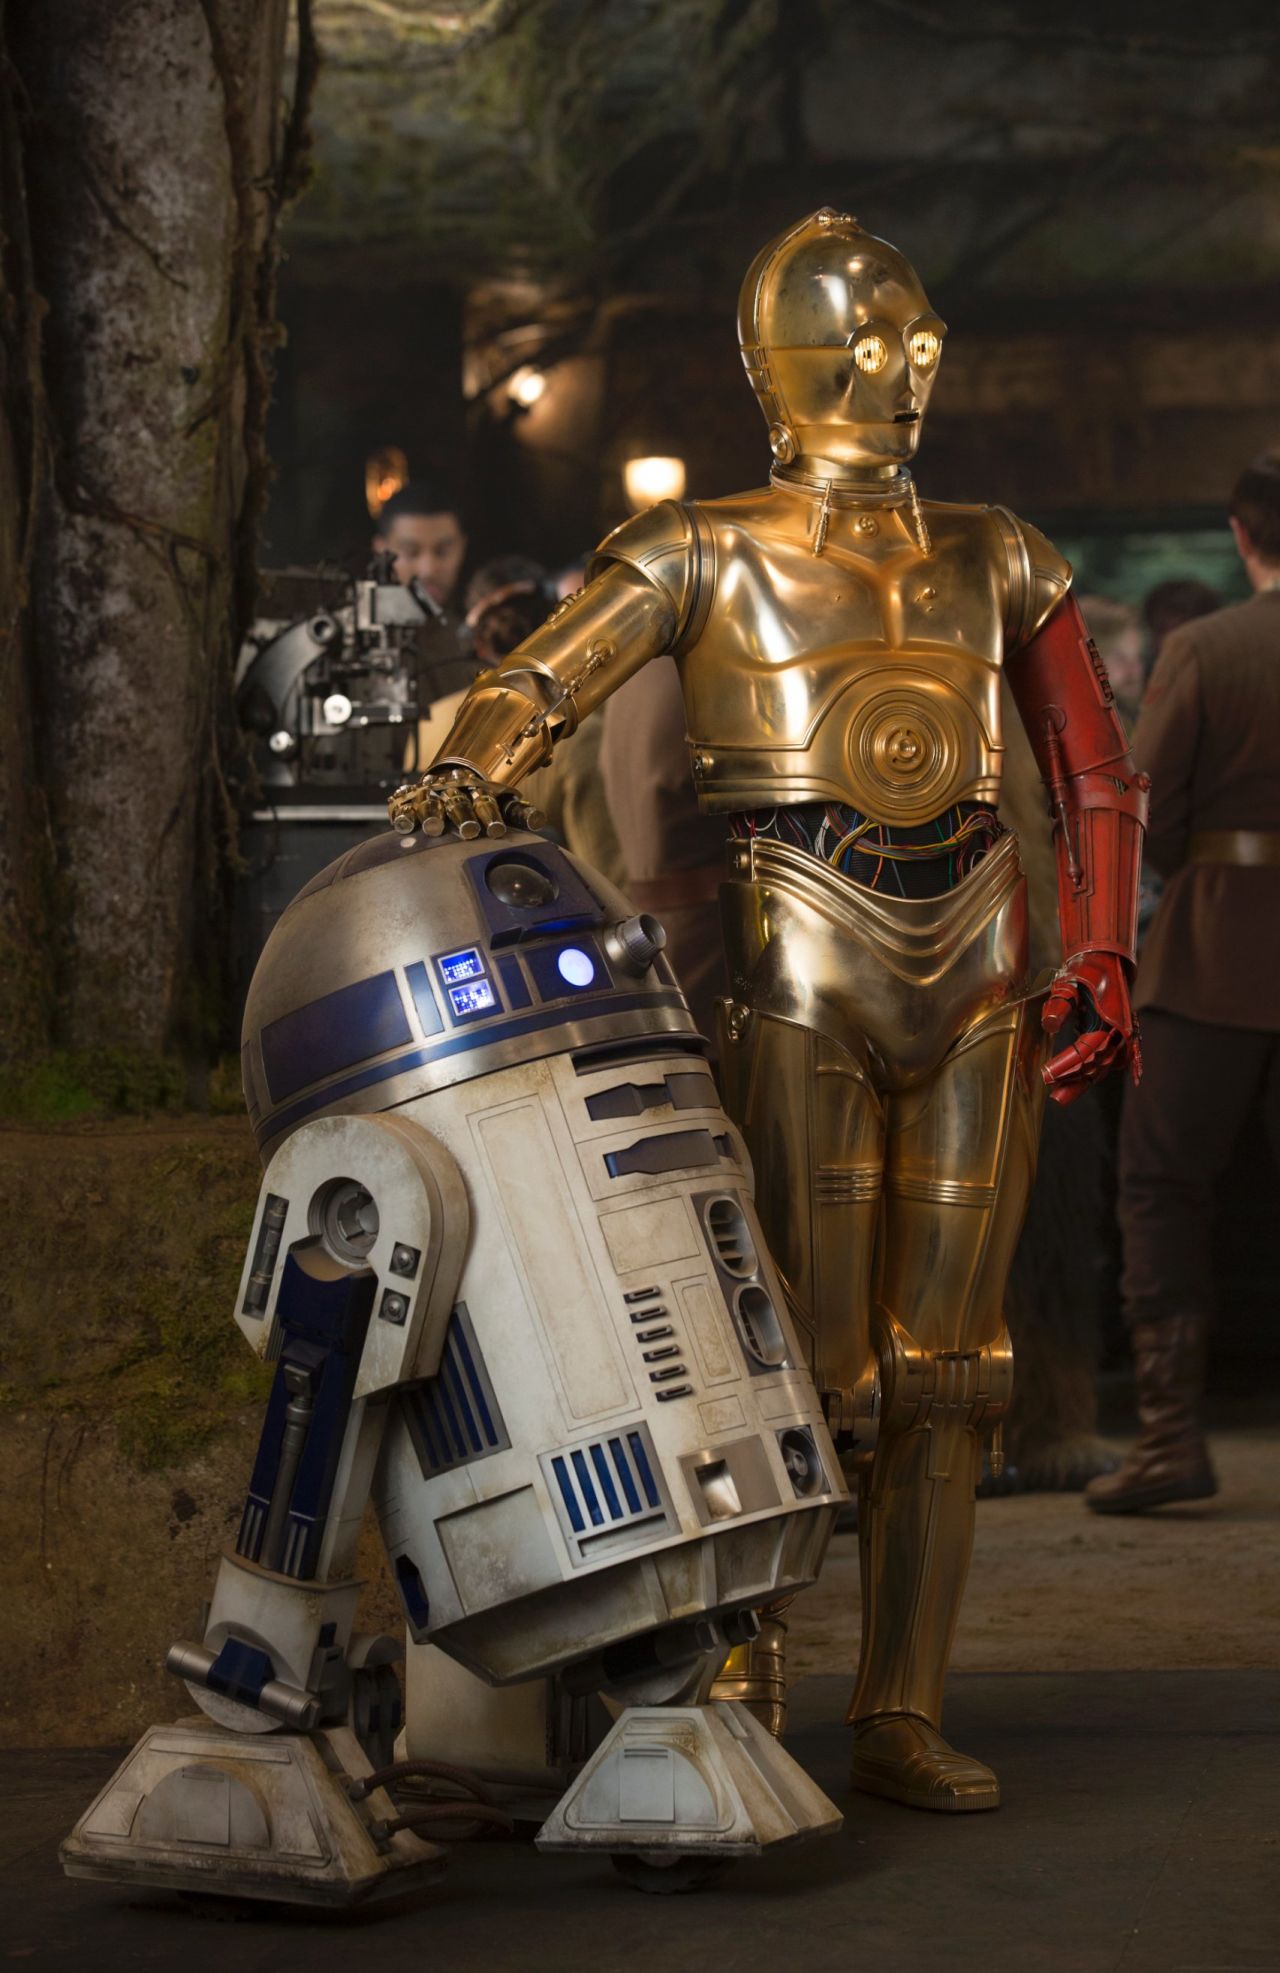 Poor old Threepio looks like a third-hand car with a door of a different color. Sloppy repair work or outlandish style choice? Whatever the case, J.J. Abrams has <a href="http://www.wired.com/2015/11/star-wars-force-awakens-jj-abrams-interview/" target="_blank" target="_blank">confirmed</a> that the red arm comes from the desire to "mark time," using a familiar character to signal the 30-year lapse since the end of "Return of the Jedi." We hear that the full story of C-3PO's limb replacement will be told in a <a href="http://www.starwars.com/news/star-wars-special-c-3po-1" target="_blank" target="_blank">comic book</a>.<br />